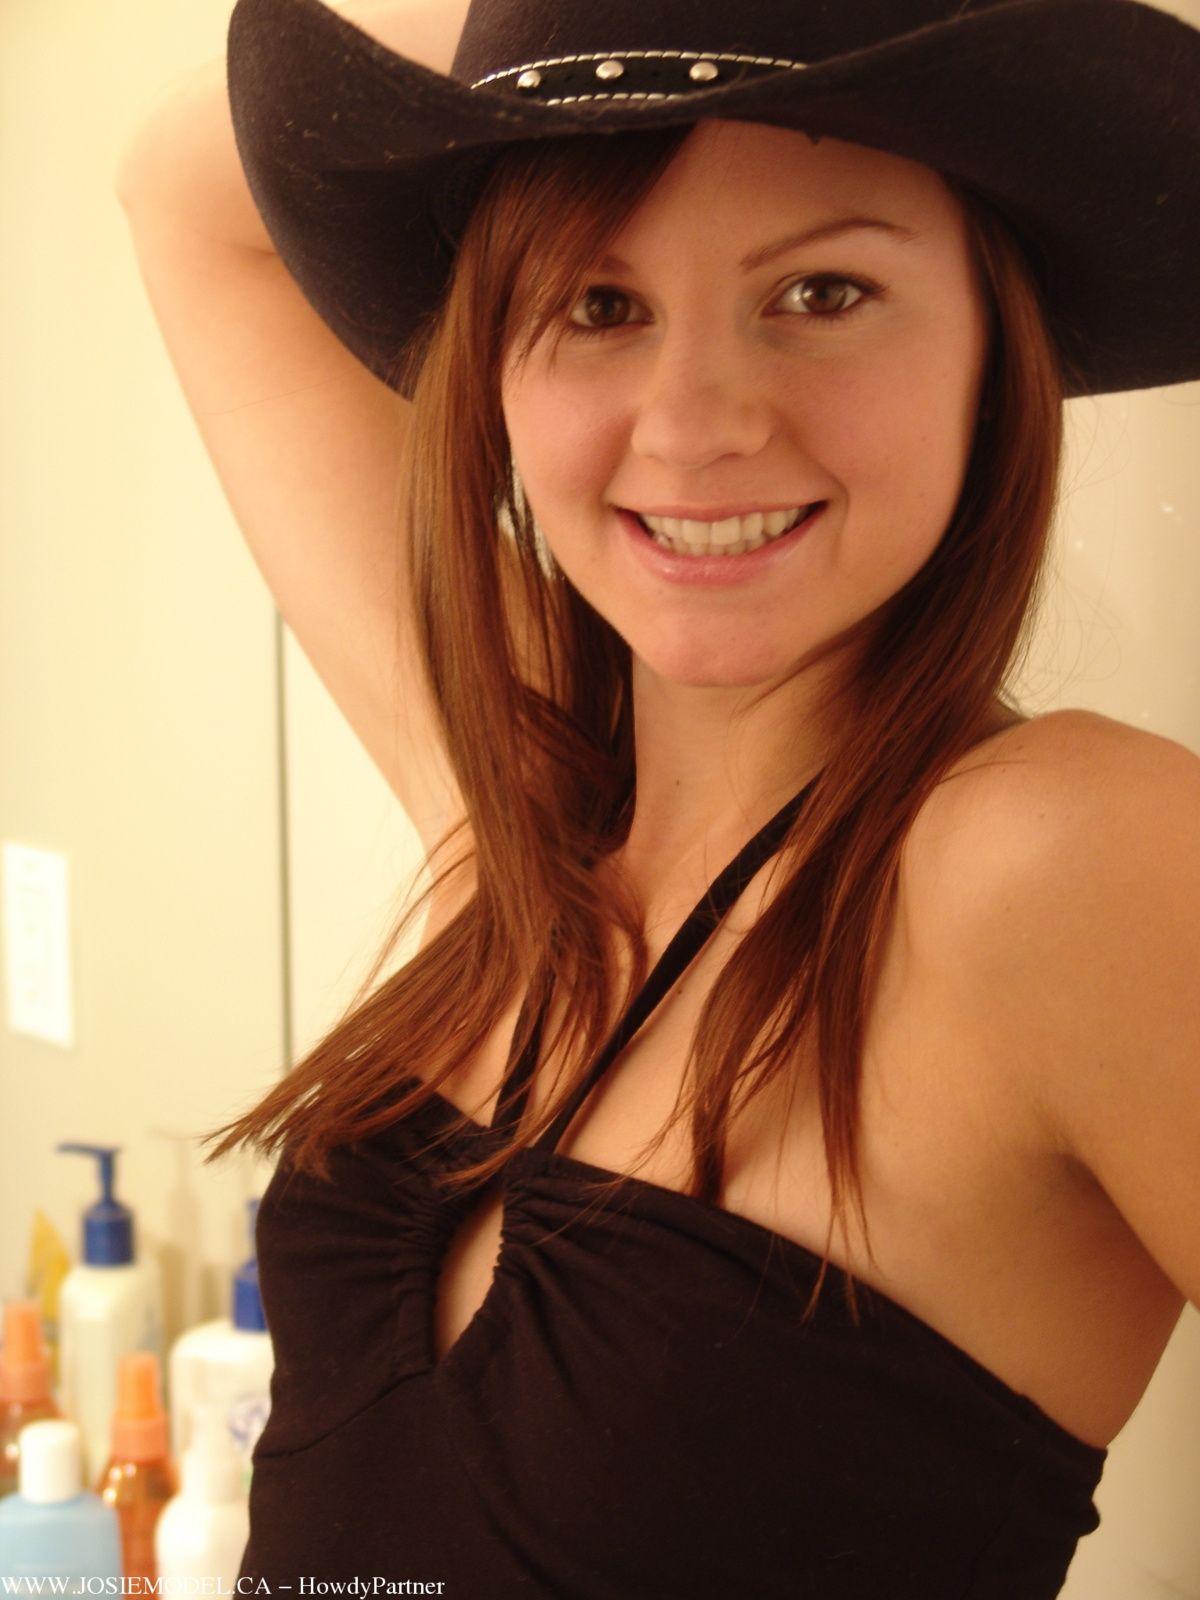 Pictures of teen porn Josie Model dressed as your sexy cowgirl #55708704